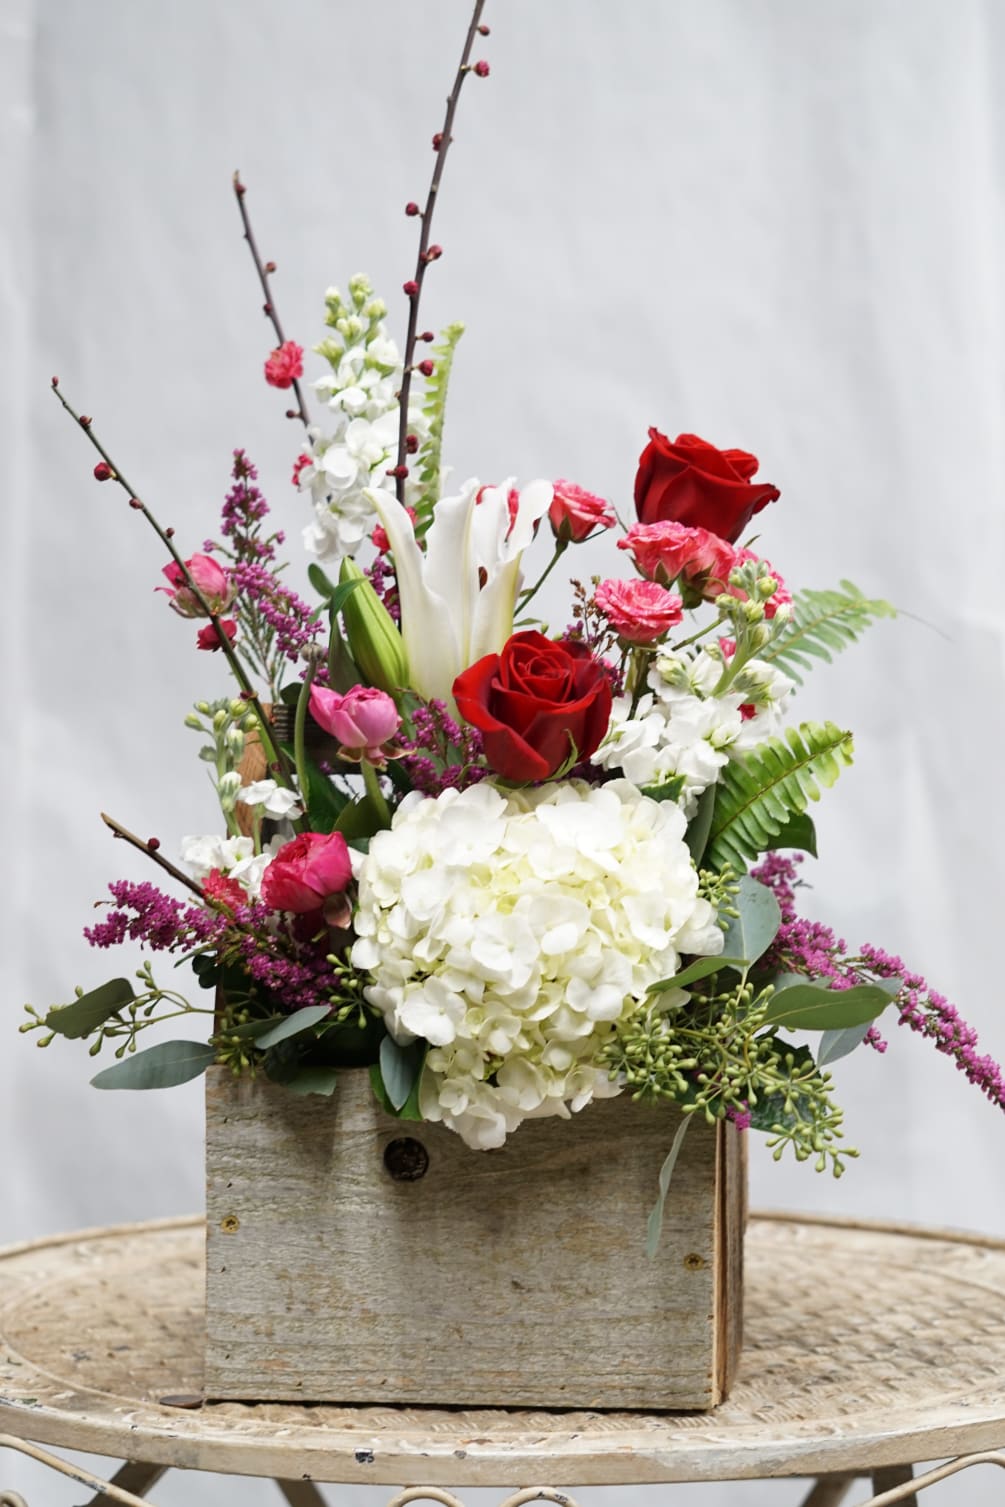 We build this beautiful fresh arrangement with all your favorites- White Hydrangea